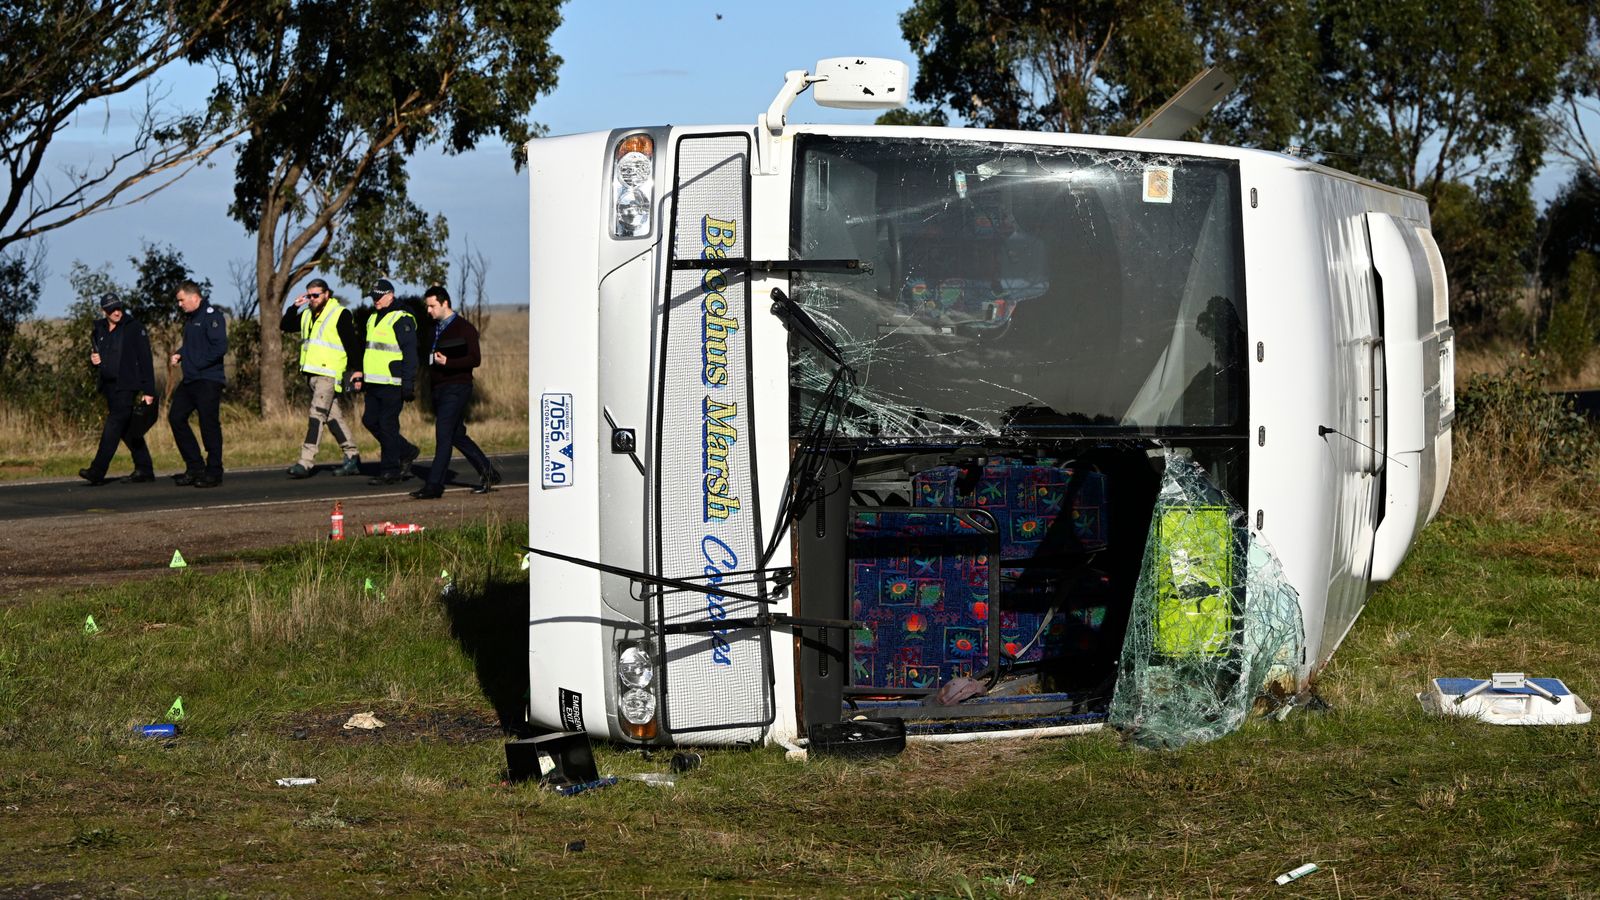 Seven children seriously hurt after truck crashes into bus, with some requiring amputations